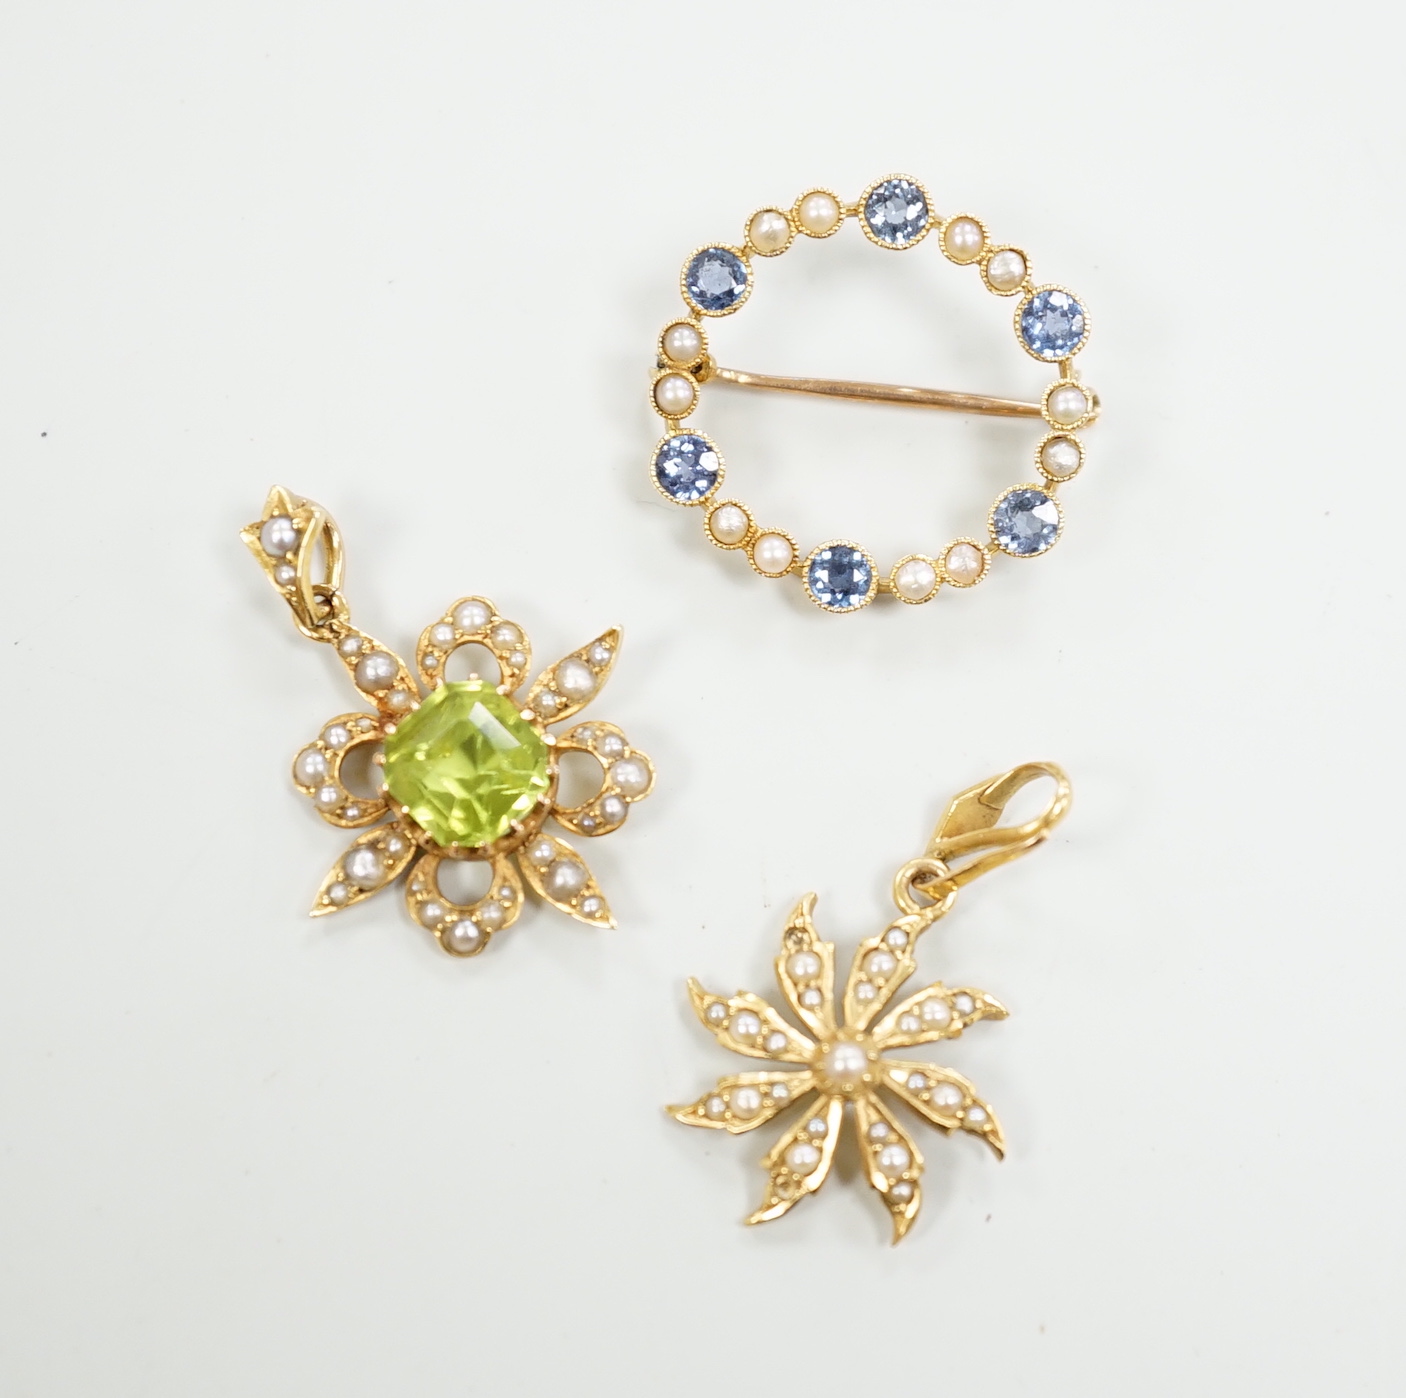 Two Edwardian 15ct and gem set pendants including peridot and seed pearl, 27mm and a similar 15ct and gem set open work circular brooch, gross weight 7 grams.